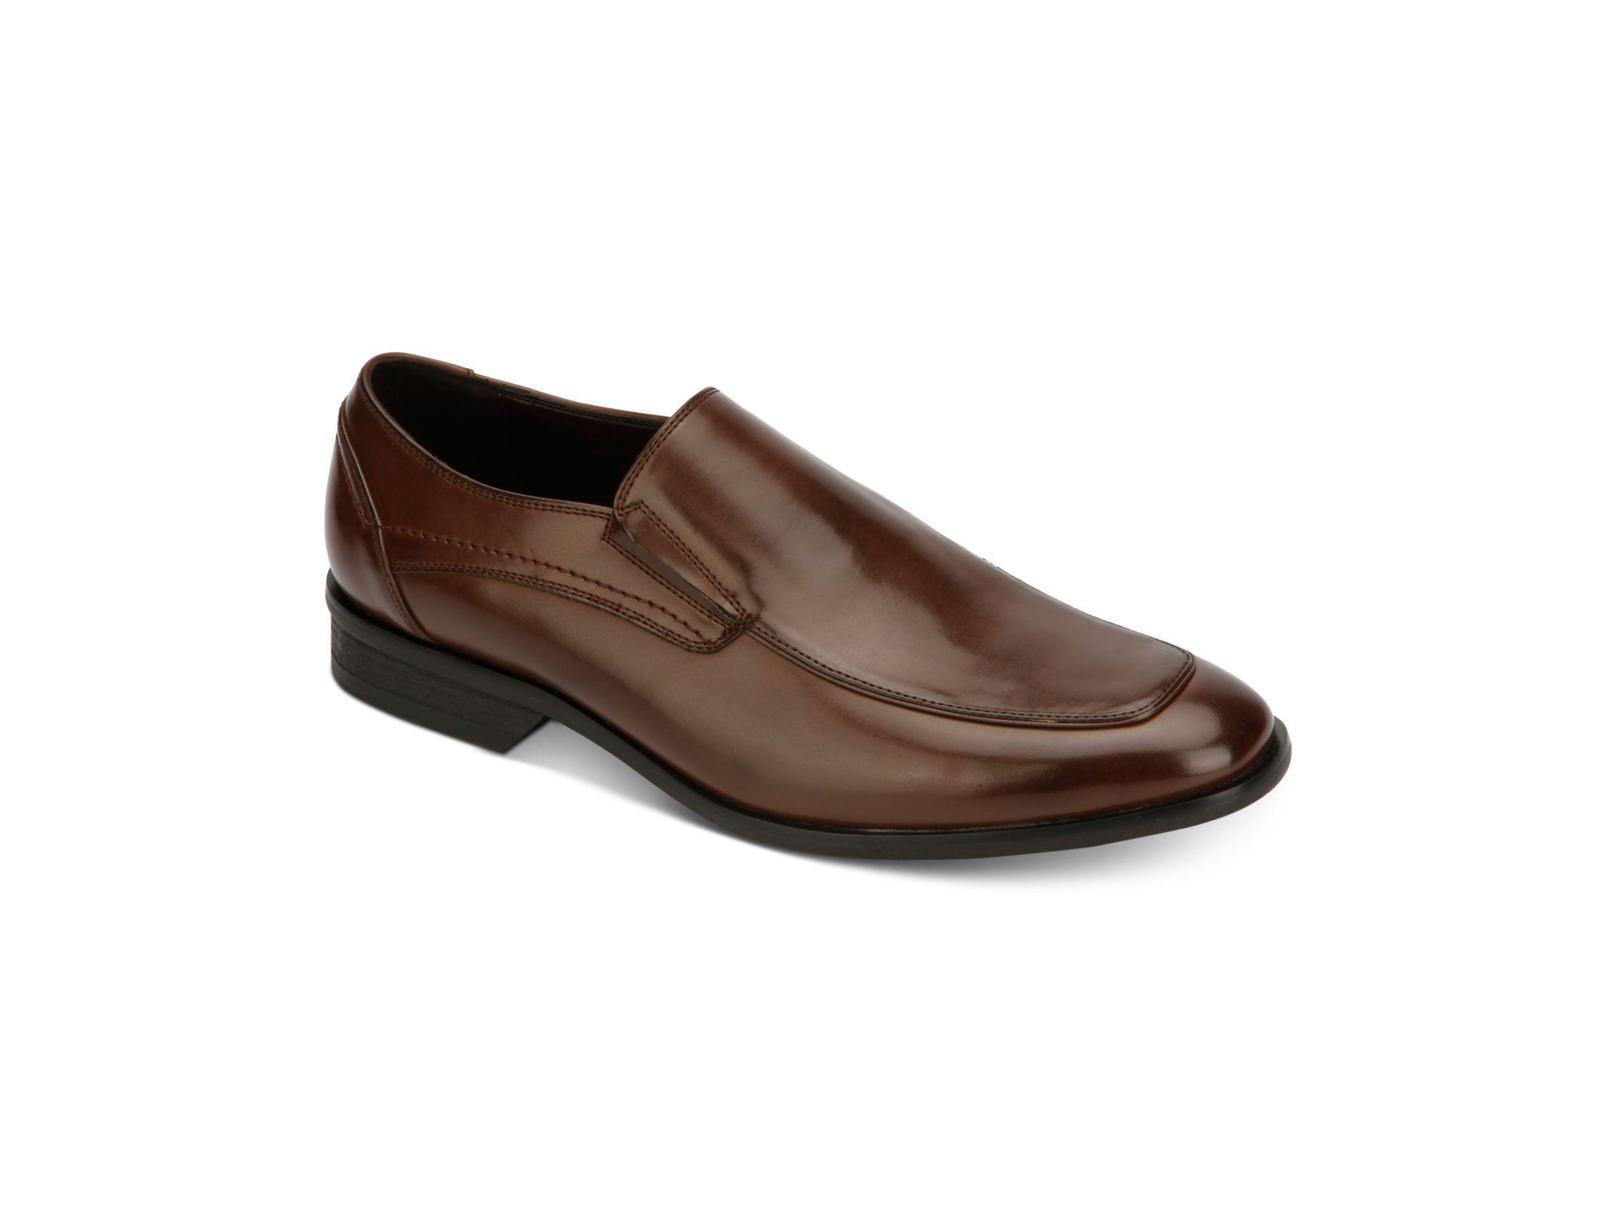 Shoes dawn Closed Toe Slip On Shoes 